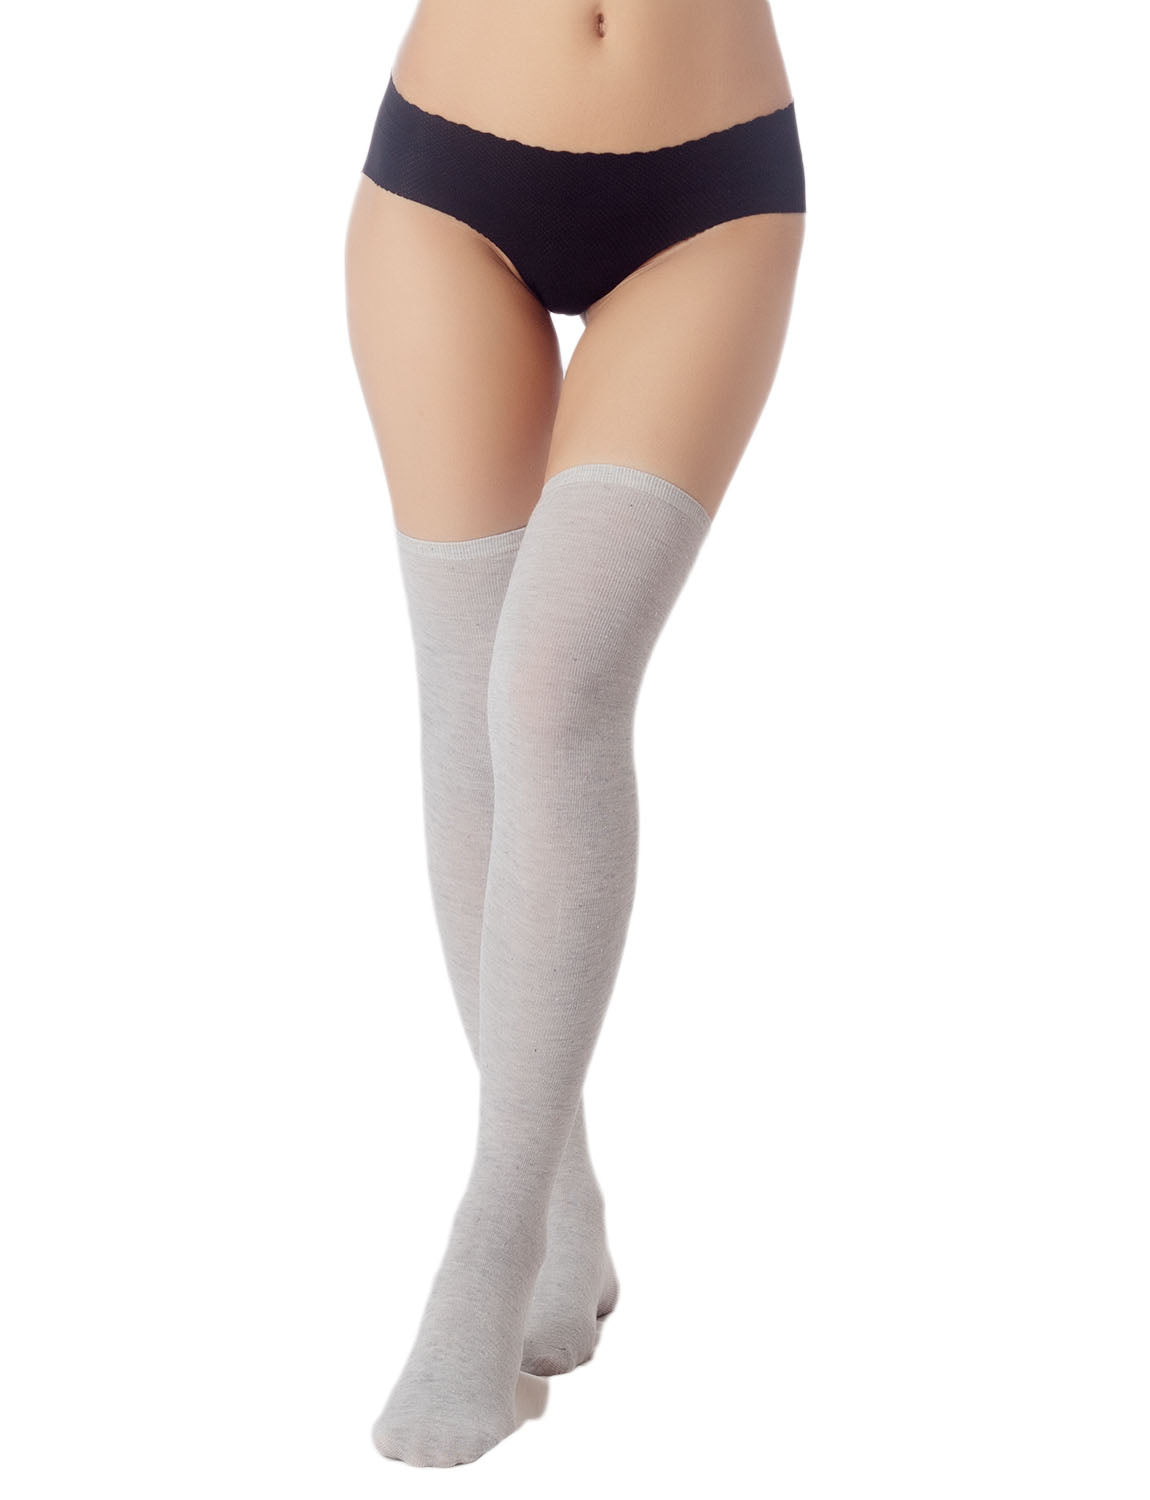 Women's Navy Stripes Sports Football Style Casual Hold-up Thigh High Long Socks